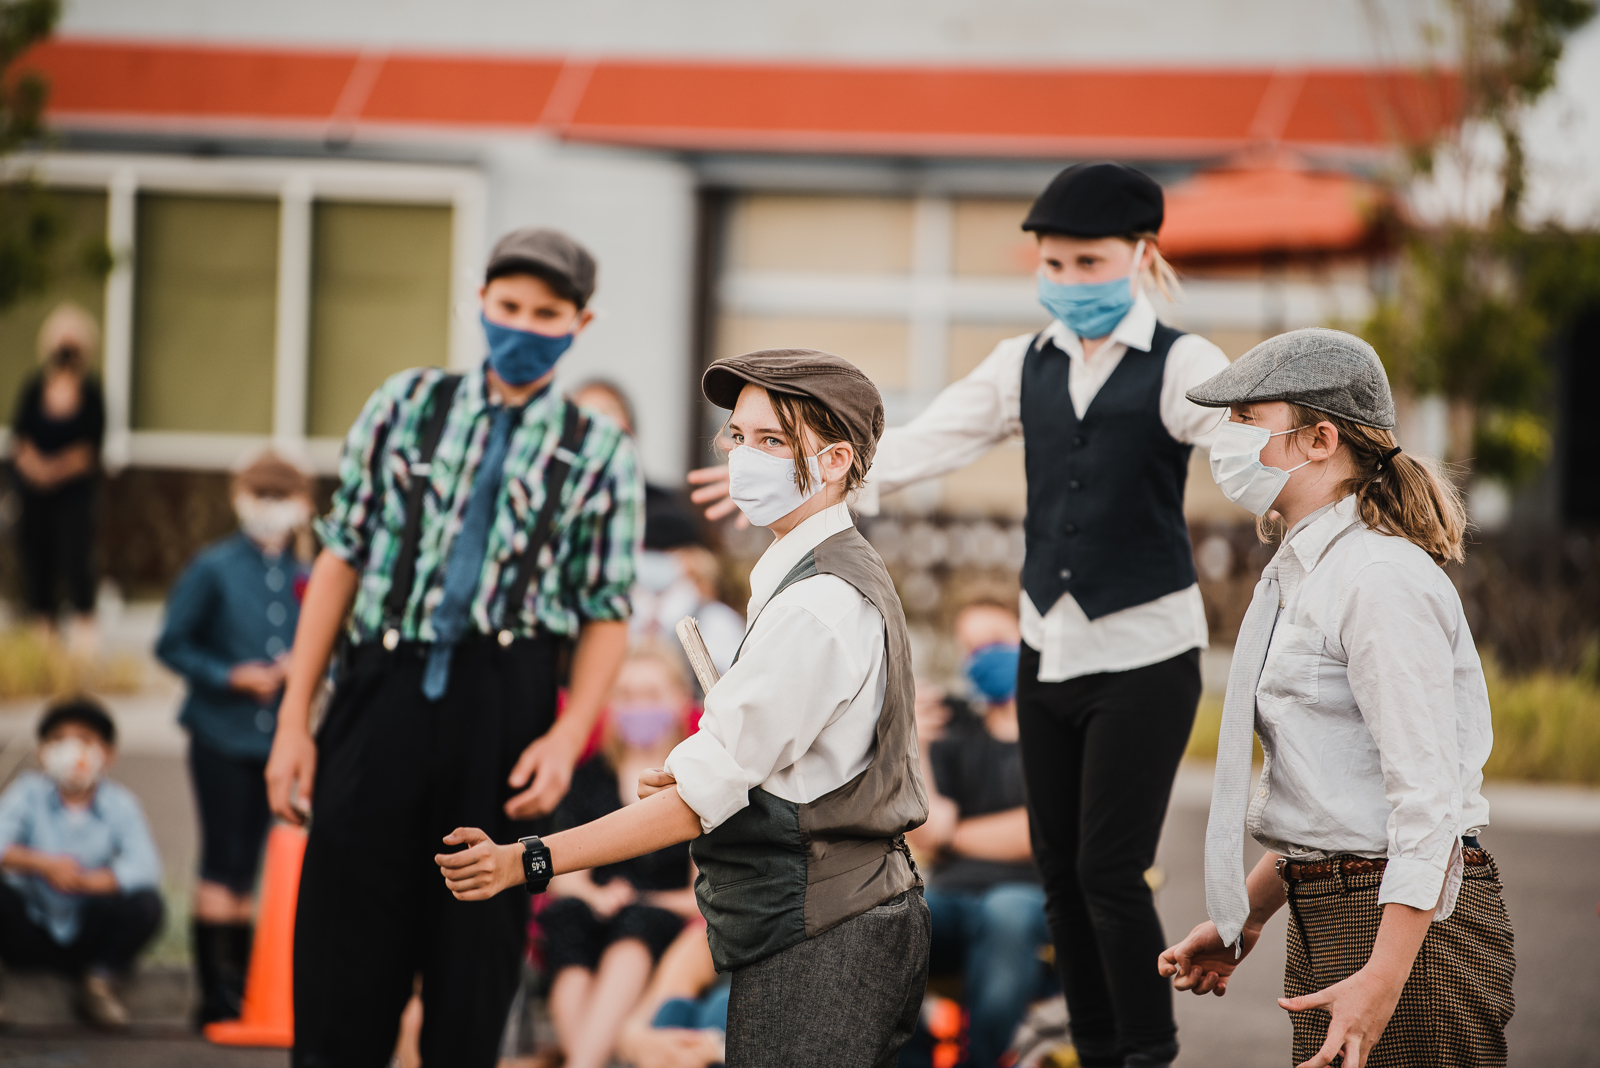 Photo of kids in theatre wearing masks outside in pageboy outfits